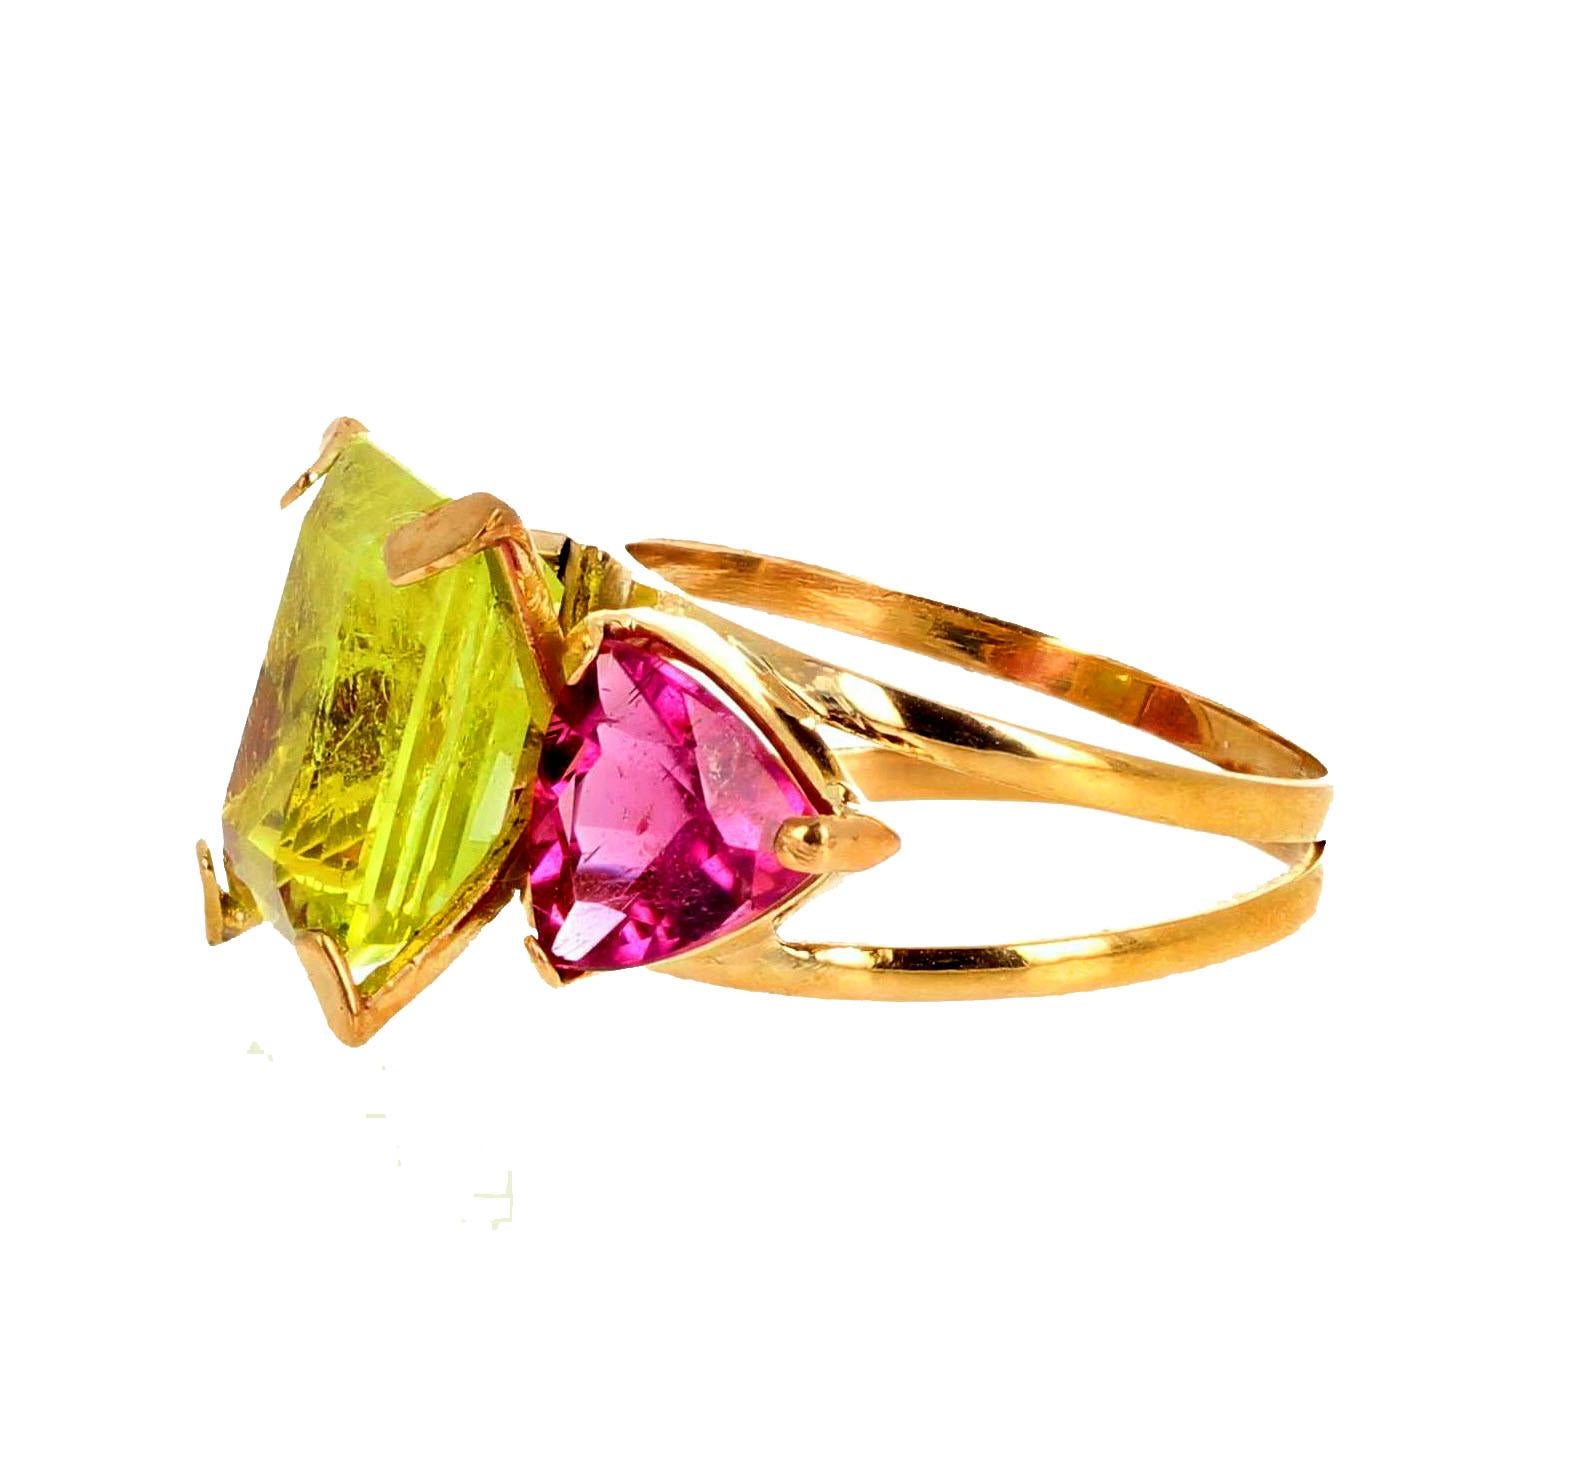 Magnificent glittering yellow green natural 5.17 Carat Chrysoberyl enhanced with two trillion 1.7 carats each gem cut natural bright pink Tourmalines set in 18K yellow gold ring size 7 (sizable). This magnificent Chrysoberyl is found in Brazil, Sri